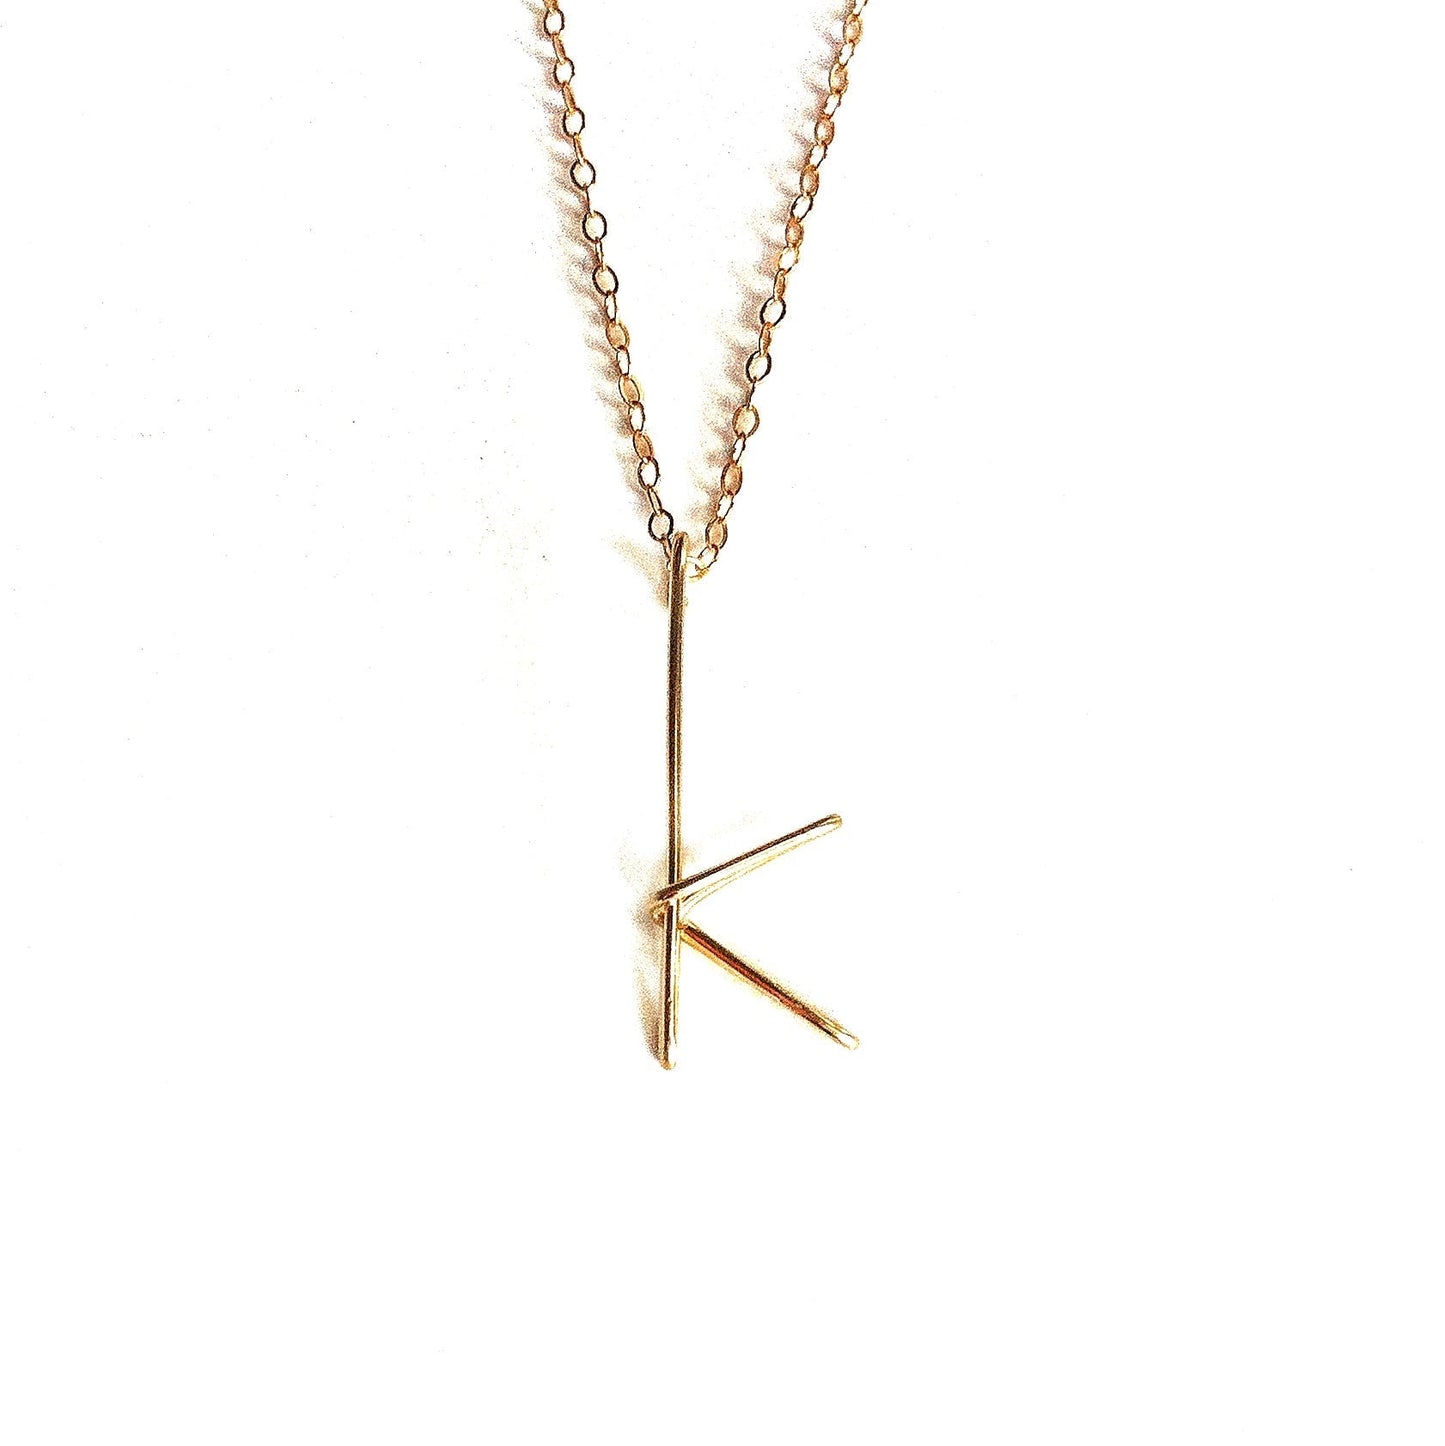 Handmade Initial Necklace Robyn Canady k 14K Gold Filled 